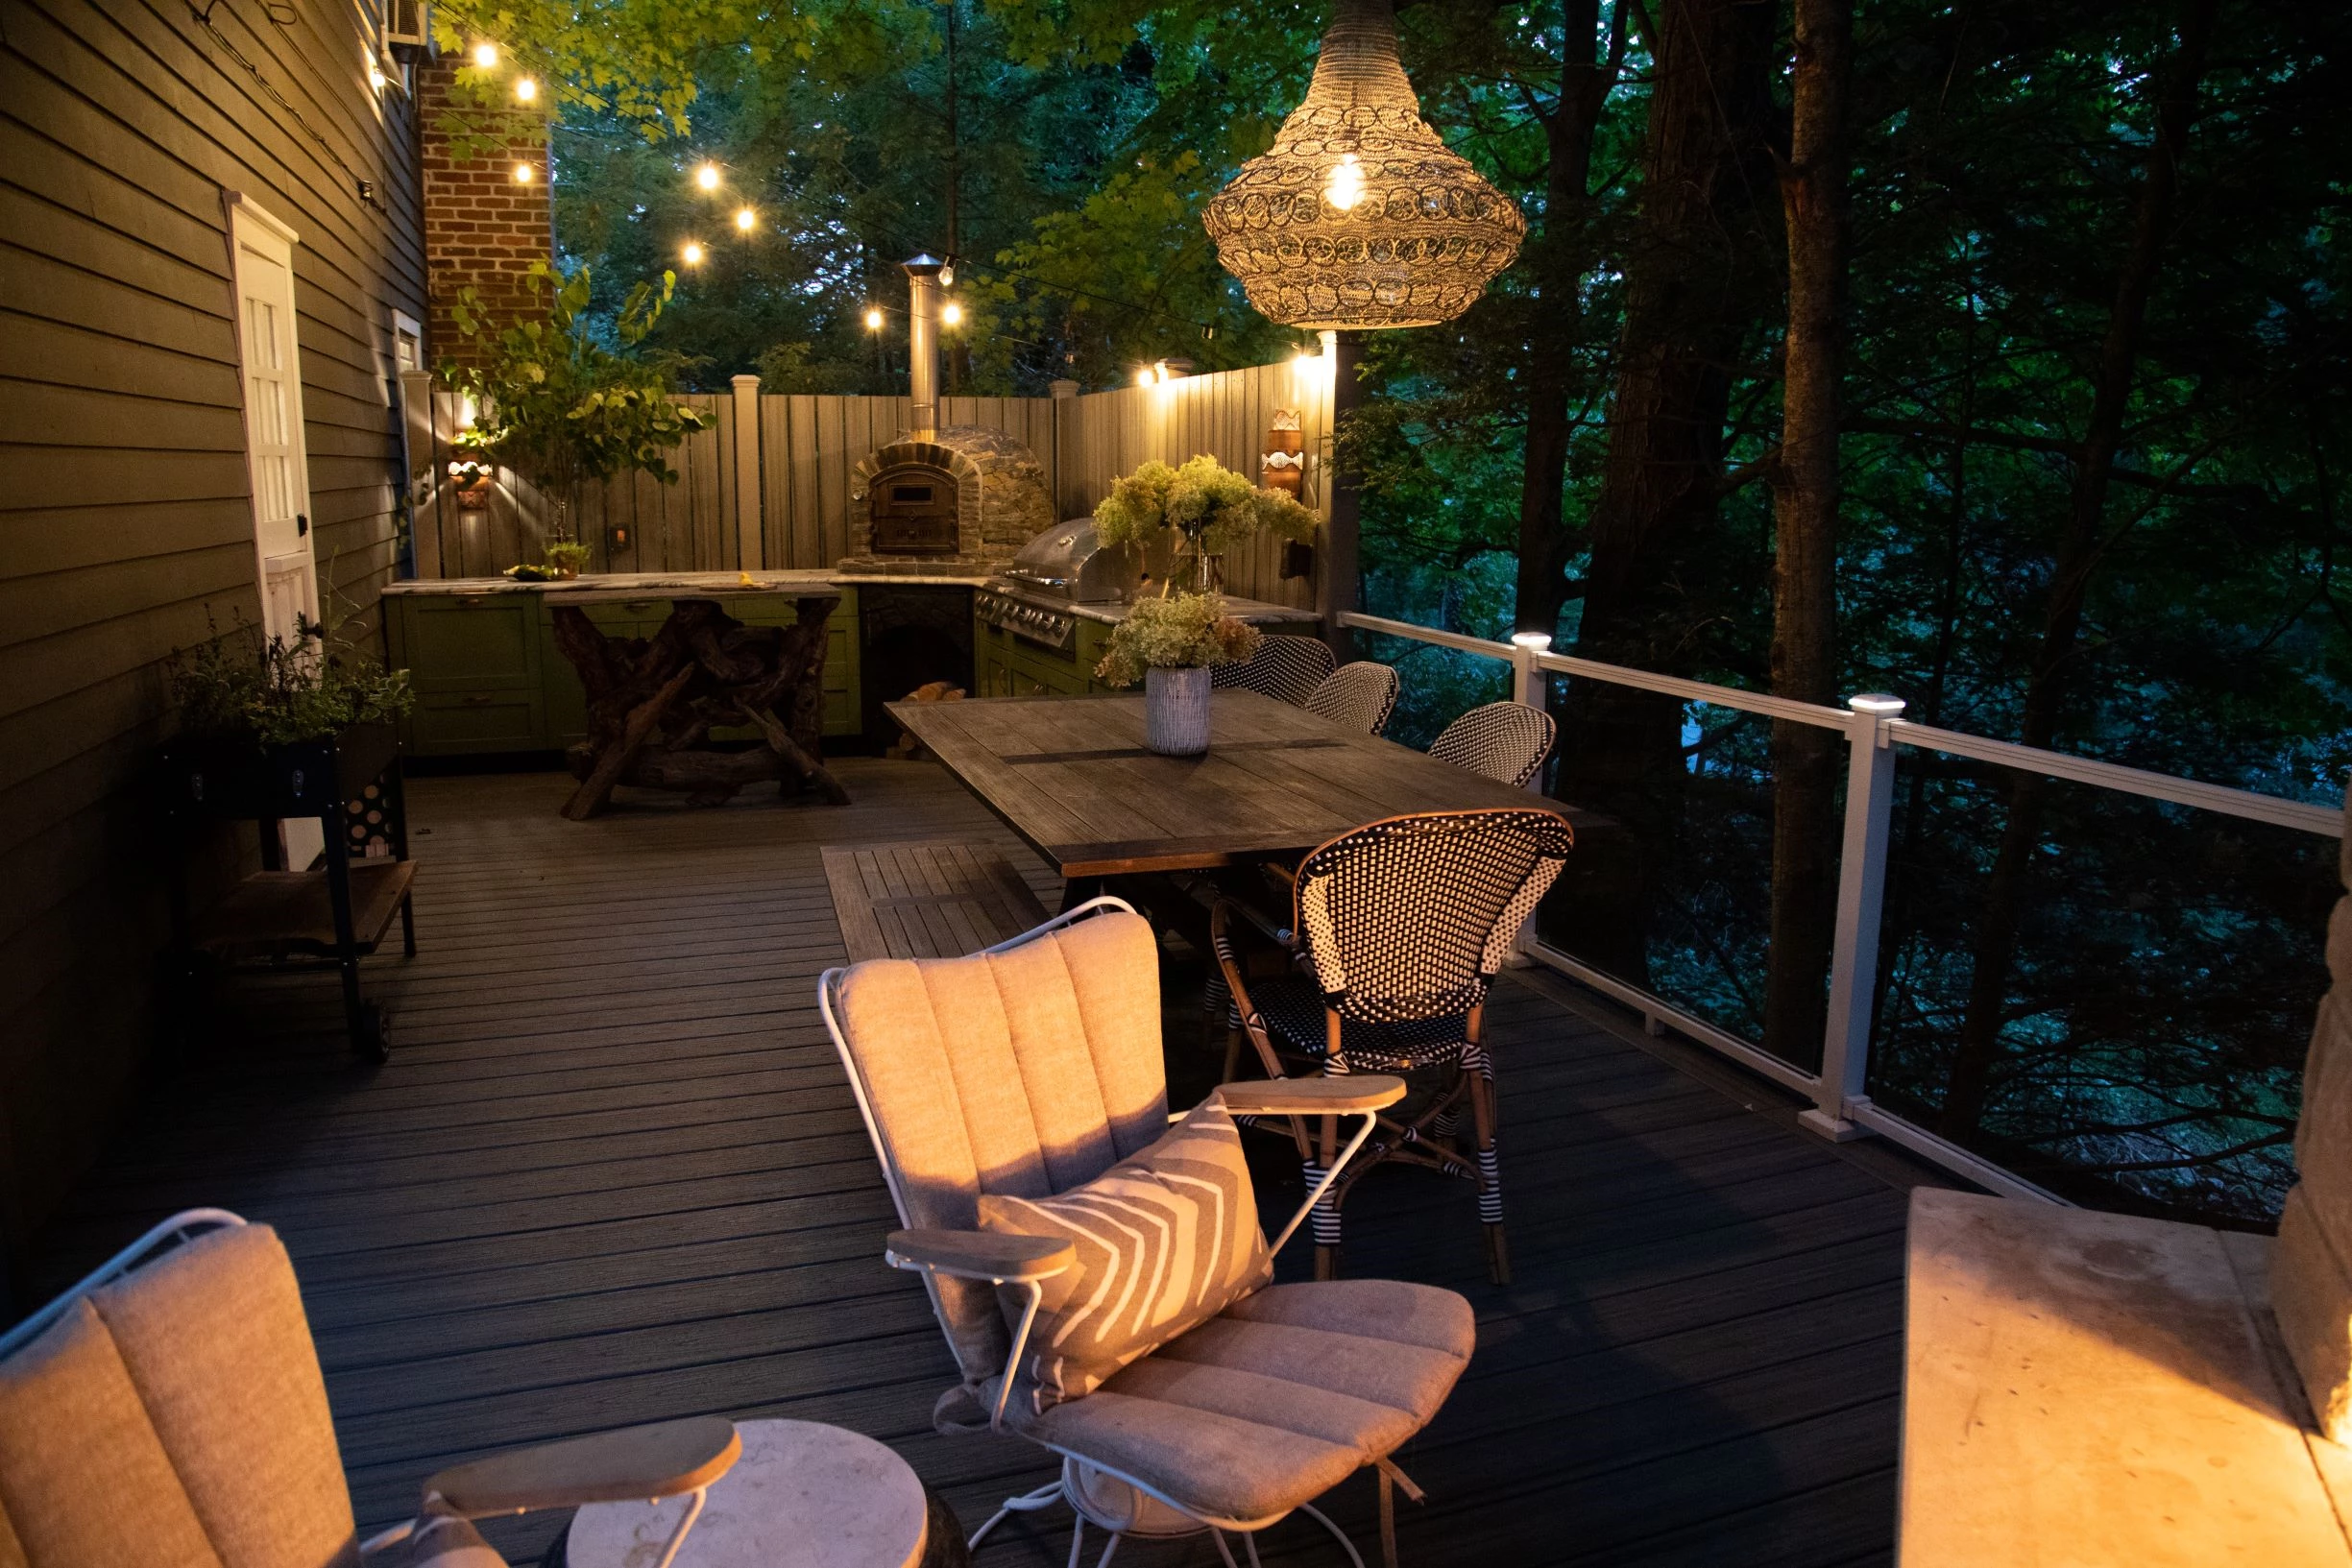 How to Hang String Lights On a Deck